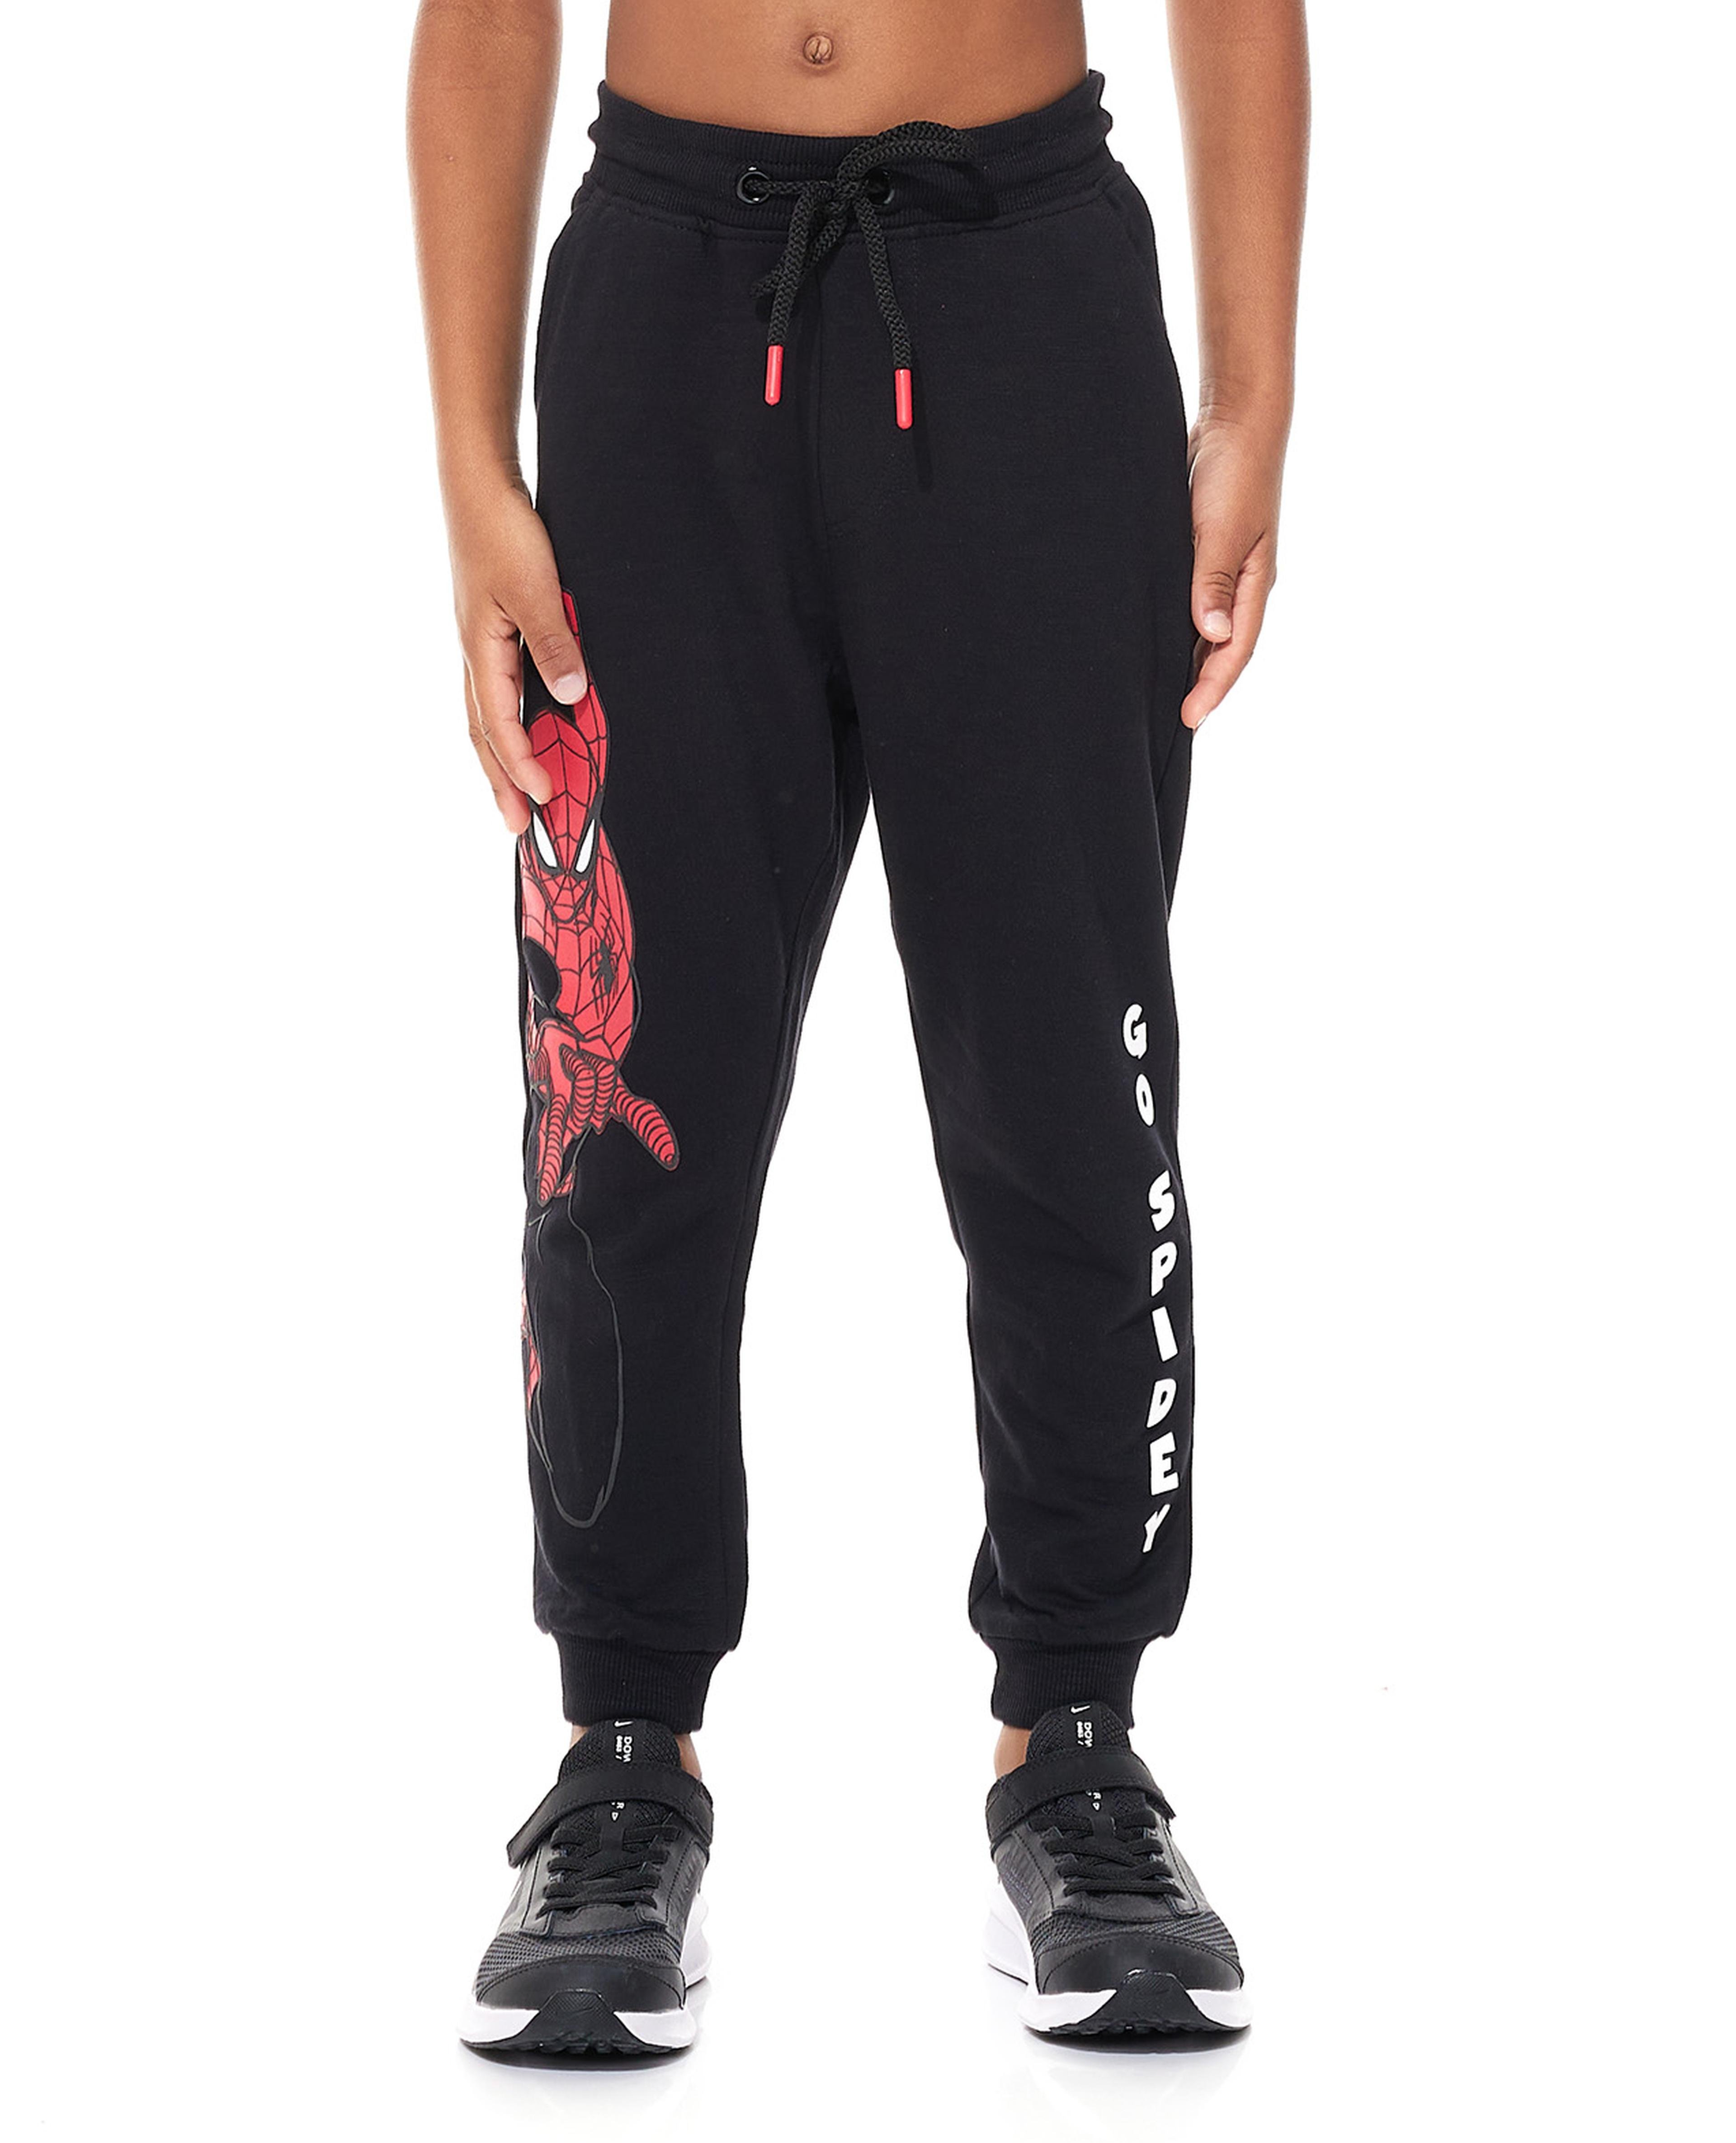 Spiderman Printed Joggers with Drawstring Waist